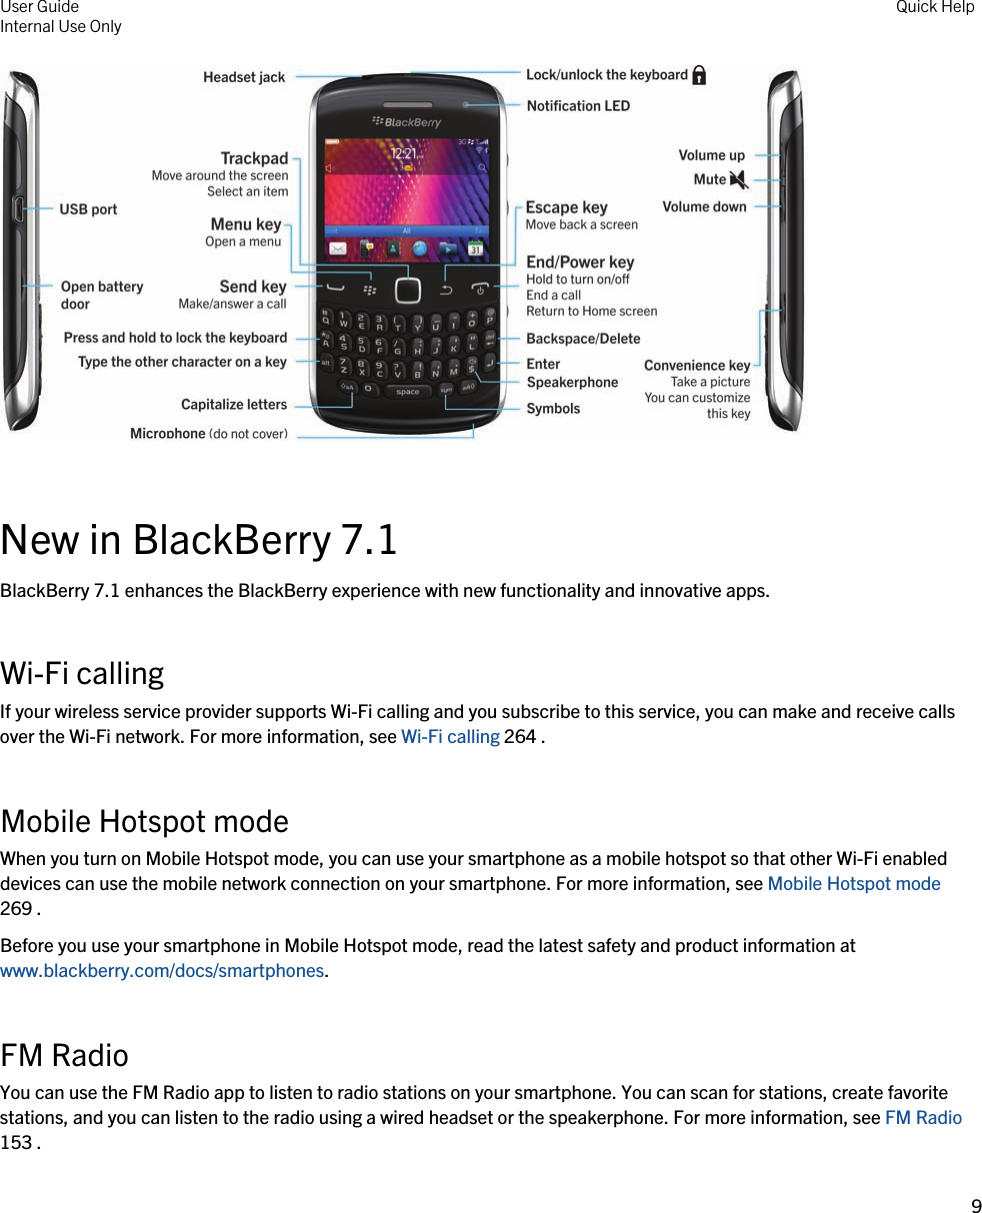  New in BlackBerry 7.1BlackBerry 7.1 enhances the BlackBerry experience with new functionality and innovative apps.Wi-Fi callingIf your wireless service provider supports Wi-Fi calling and you subscribe to this service, you can make and receive calls over the Wi-Fi network. For more information, see Wi-Fi calling 264 .Mobile Hotspot modeWhen you turn on Mobile Hotspot mode, you can use your smartphone as a mobile hotspot so that other Wi-Fi enabled devices can use the mobile network connection on your smartphone. For more information, see Mobile Hotspot mode 269 .Before you use your smartphone in Mobile Hotspot mode, read the latest safety and product information at www.blackberry.com/docs/smartphones.FM RadioYou can use the FM Radio app to listen to radio stations on your smartphone. You can scan for stations, create favorite stations, and you can listen to the radio using a wired headset or the speakerphone. For more information, see FM Radio 153 .User GuideInternal Use Only Quick Help9 